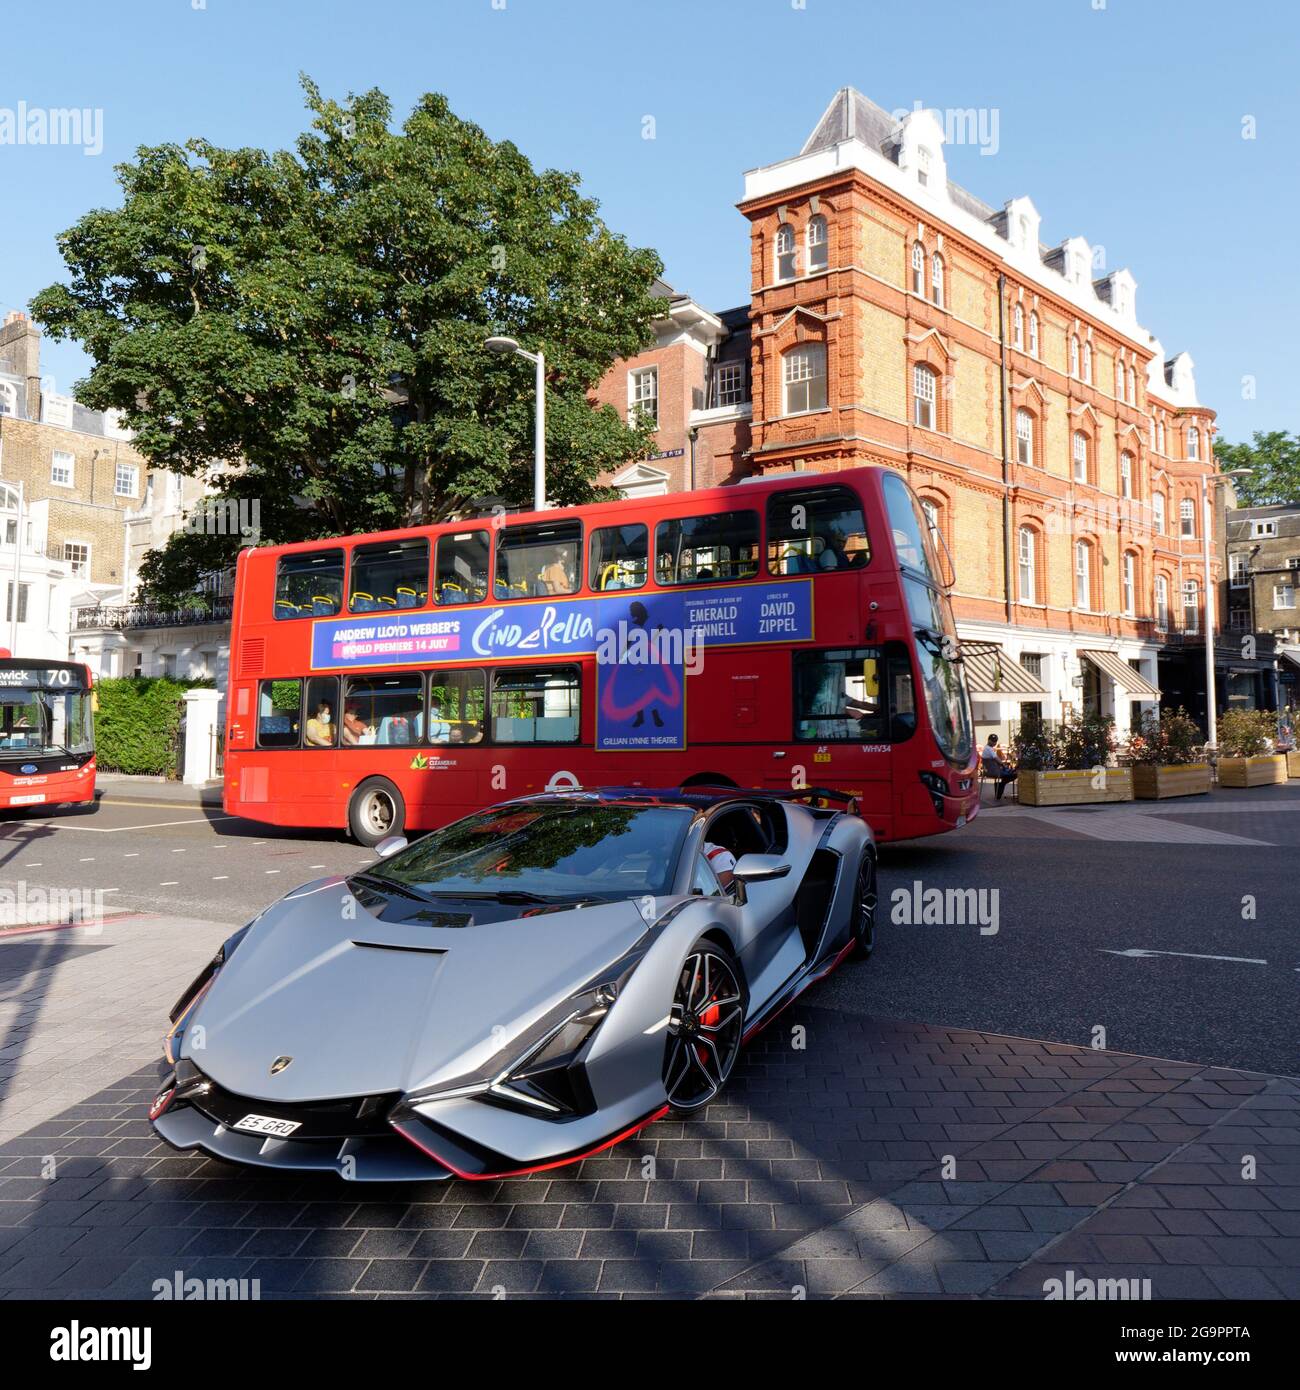 London, Greater London, England, July 17 2021: Sports car and bus at a crossroads by Exhibition Road in South Kensington. Stock Photo